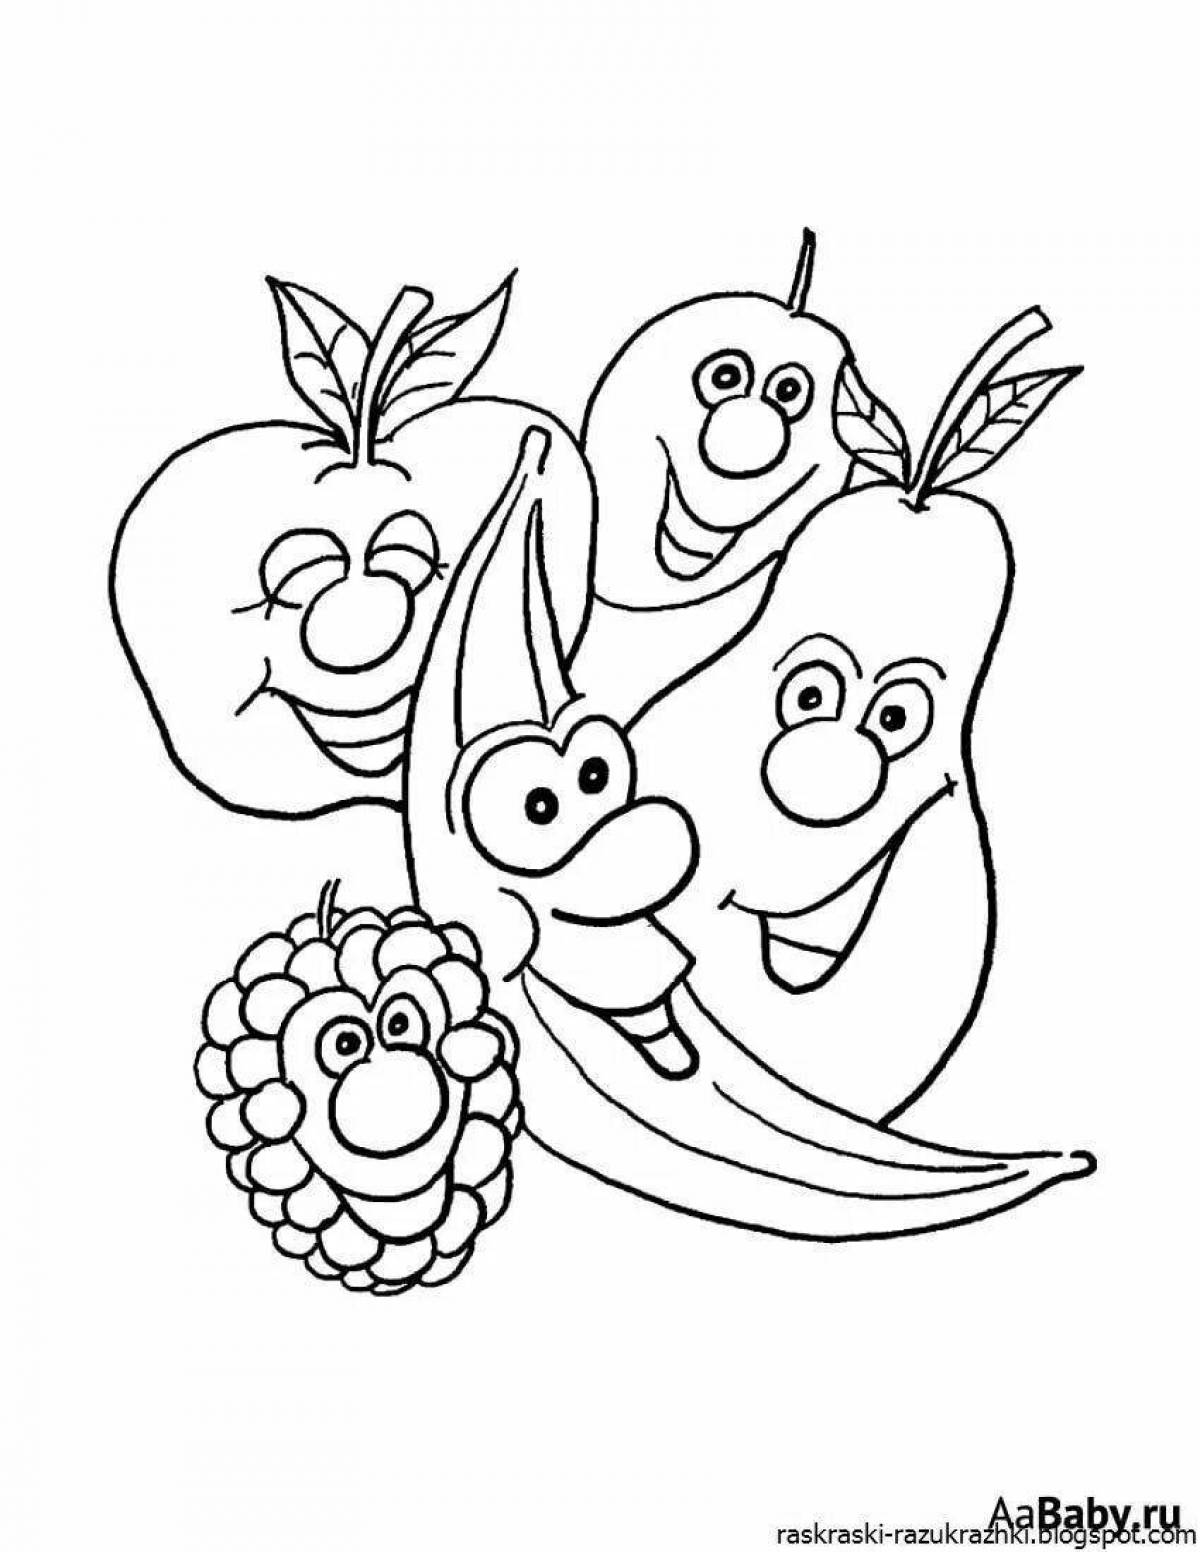 Coloring pages with fruits